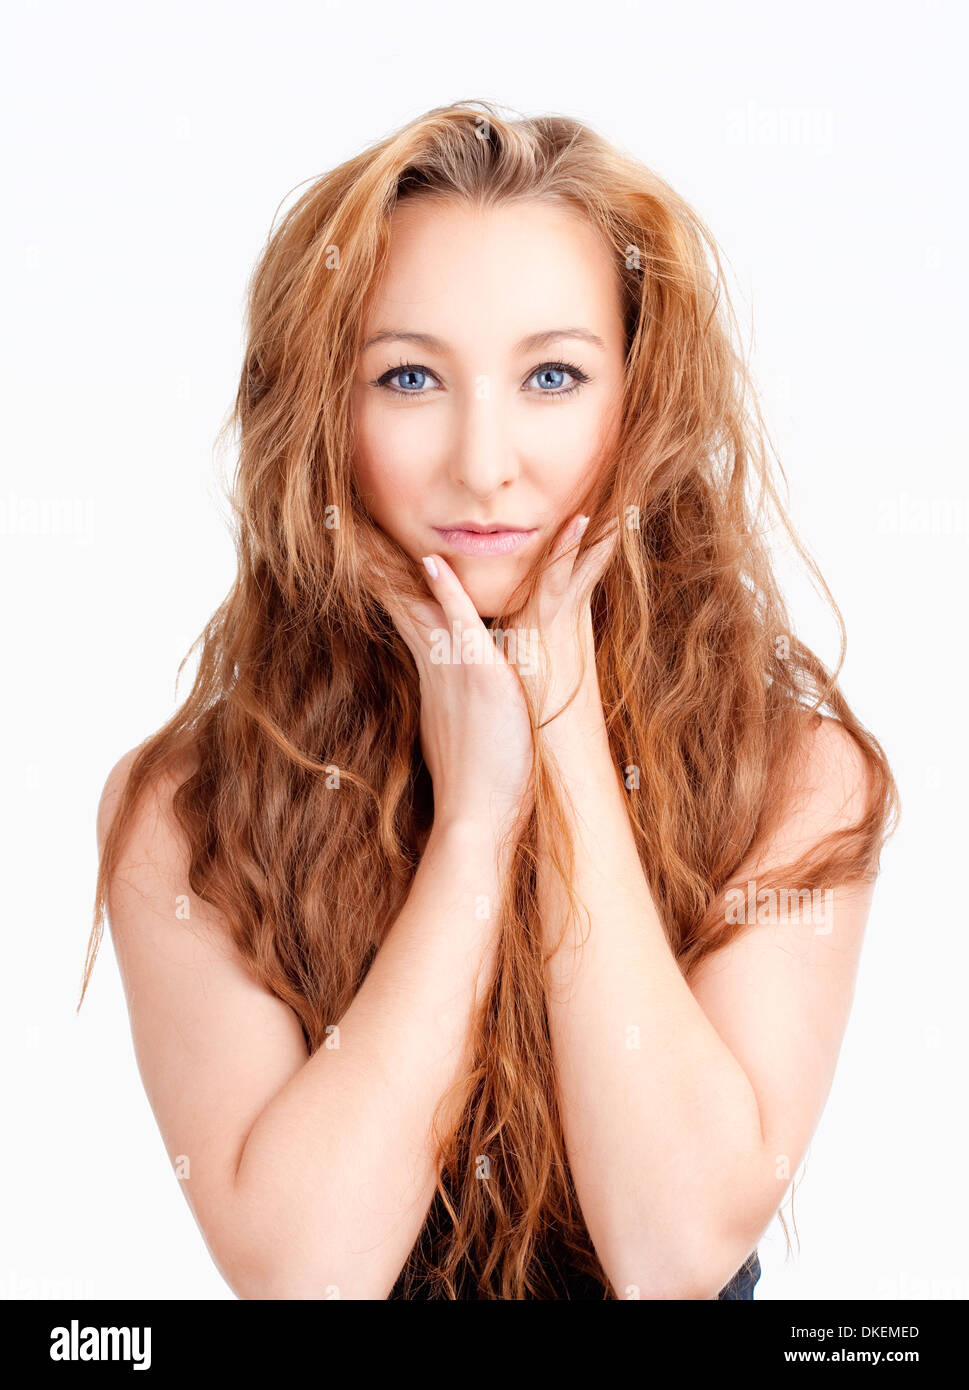 Portrait of a Young Girl with Long Brown Hair and Blue Eyes Stock Photo